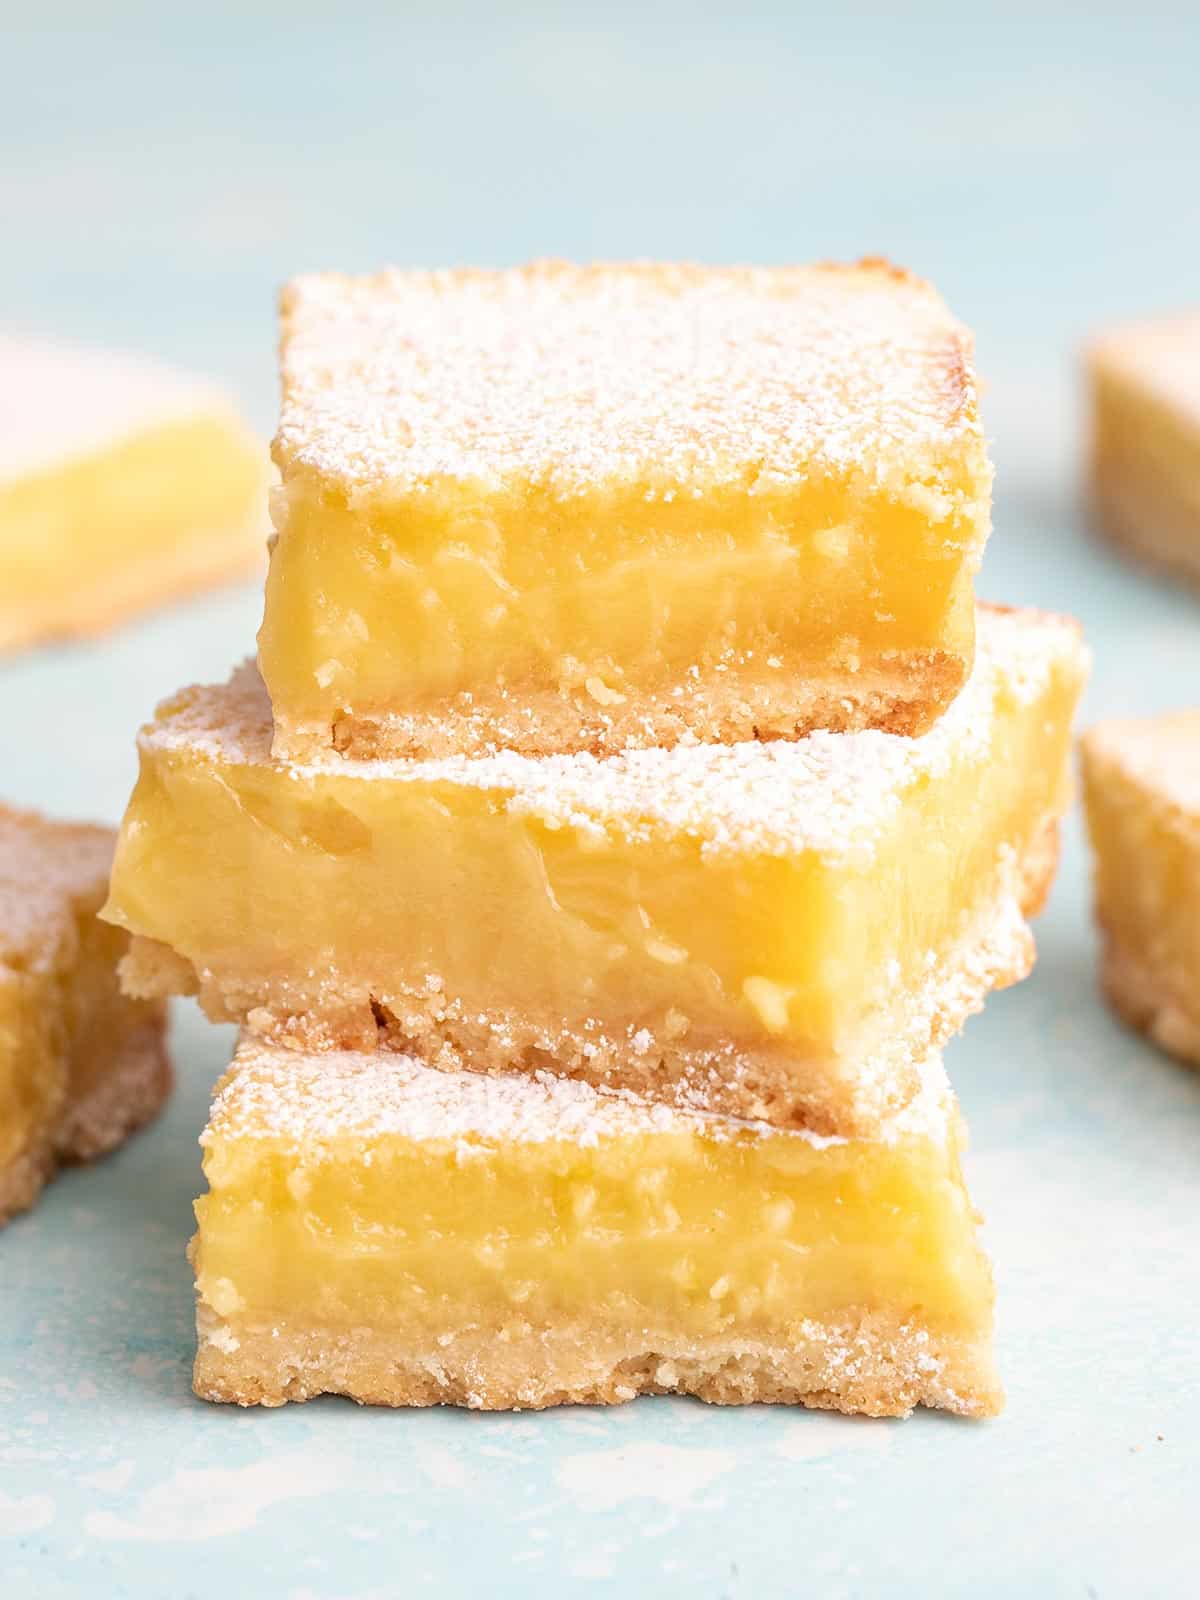 A stack of three lemon bars on a blue background.